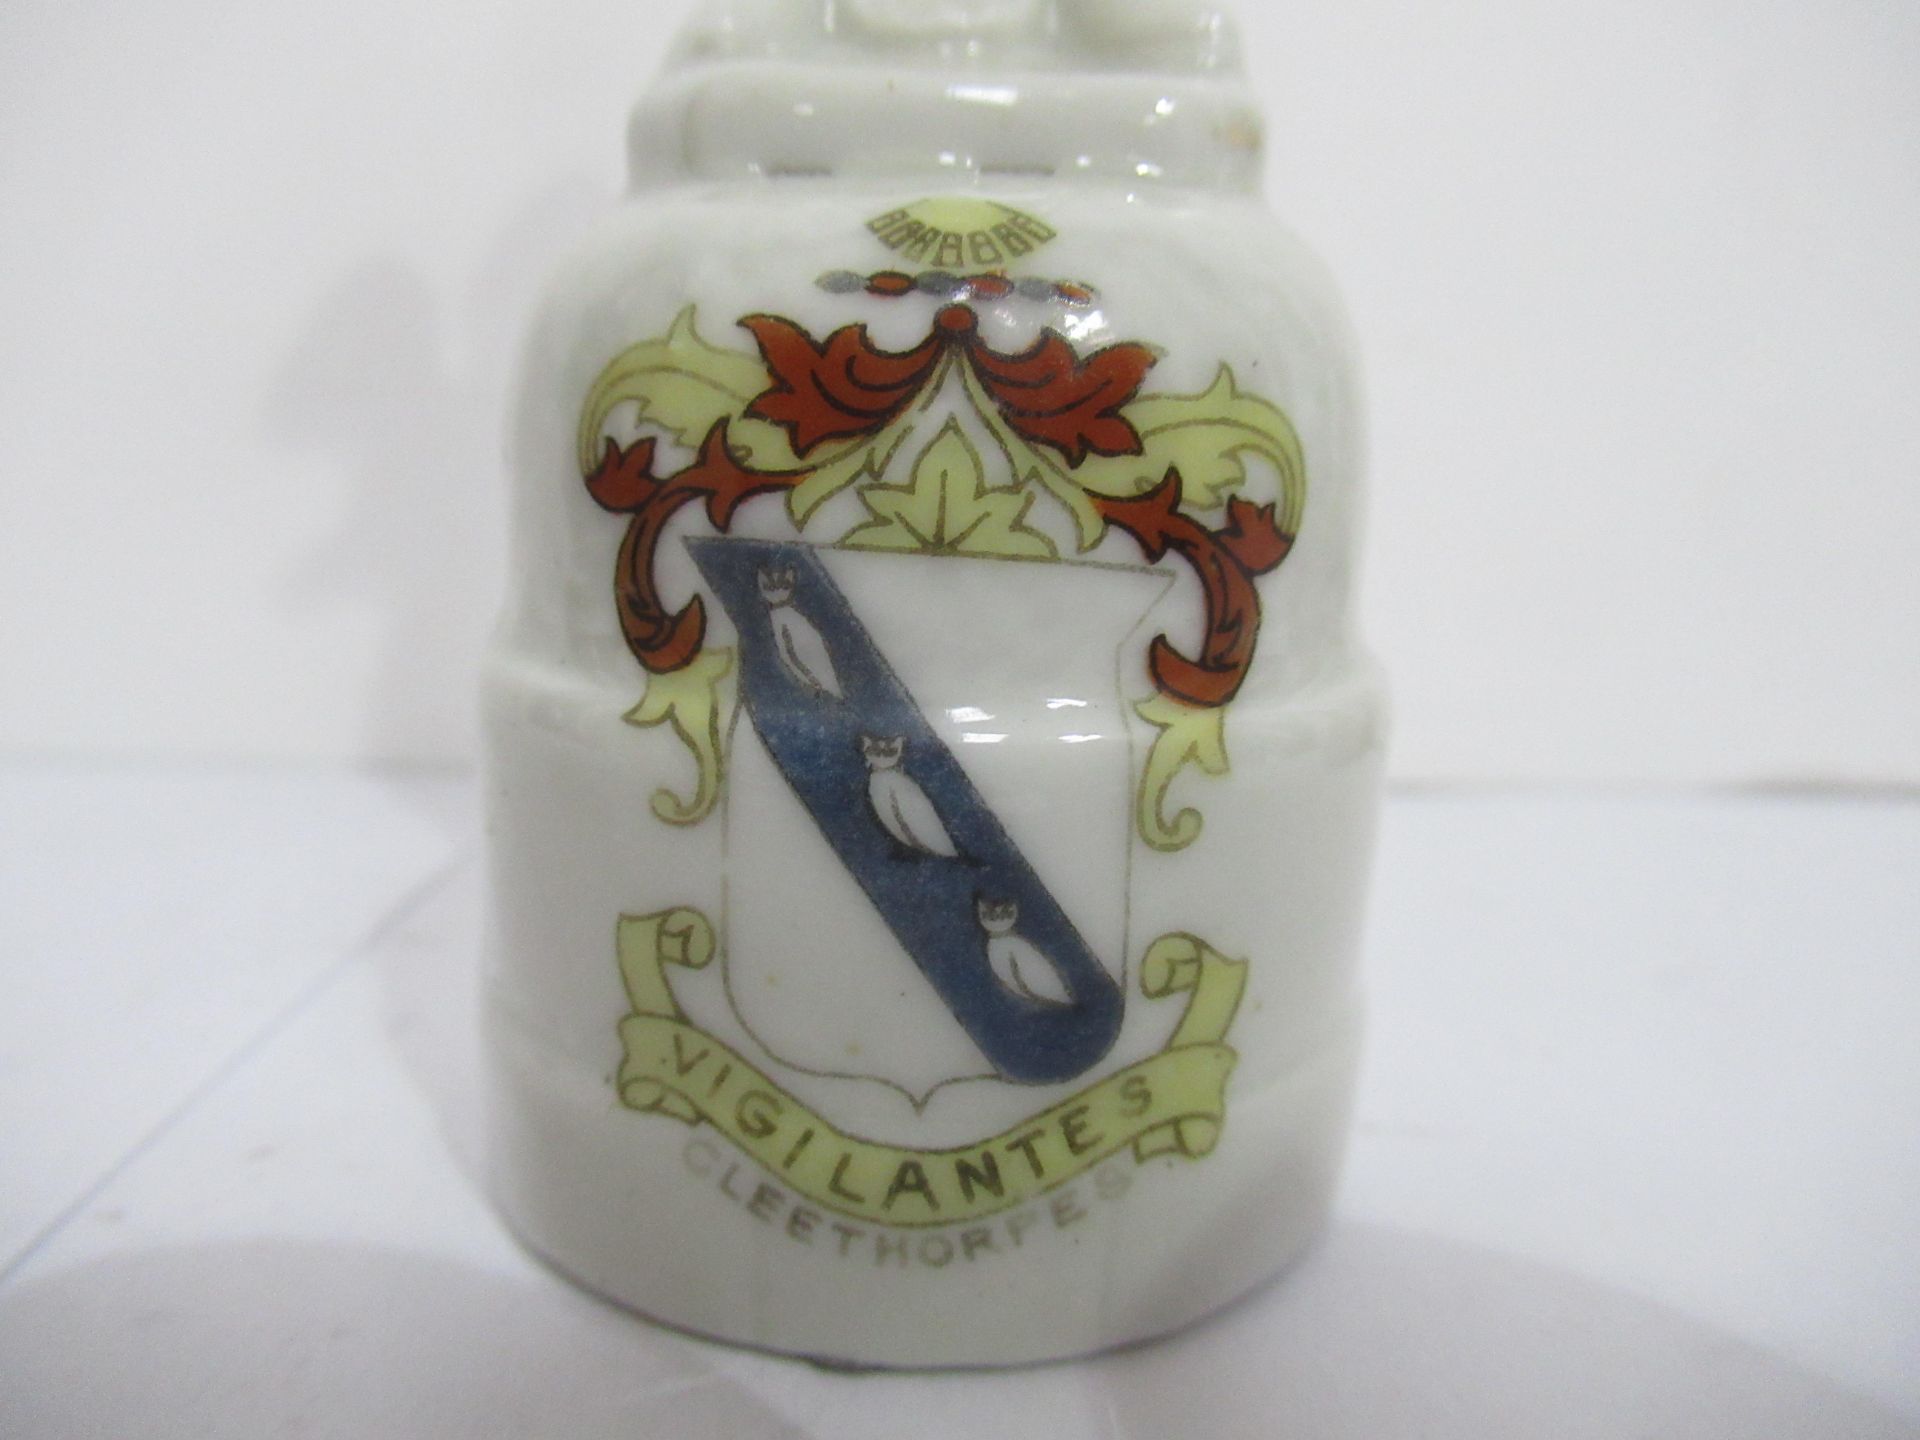 2x Crested China figures of the Leaking Boot' both with Cleethorpes coat of arms - Image 12 of 13